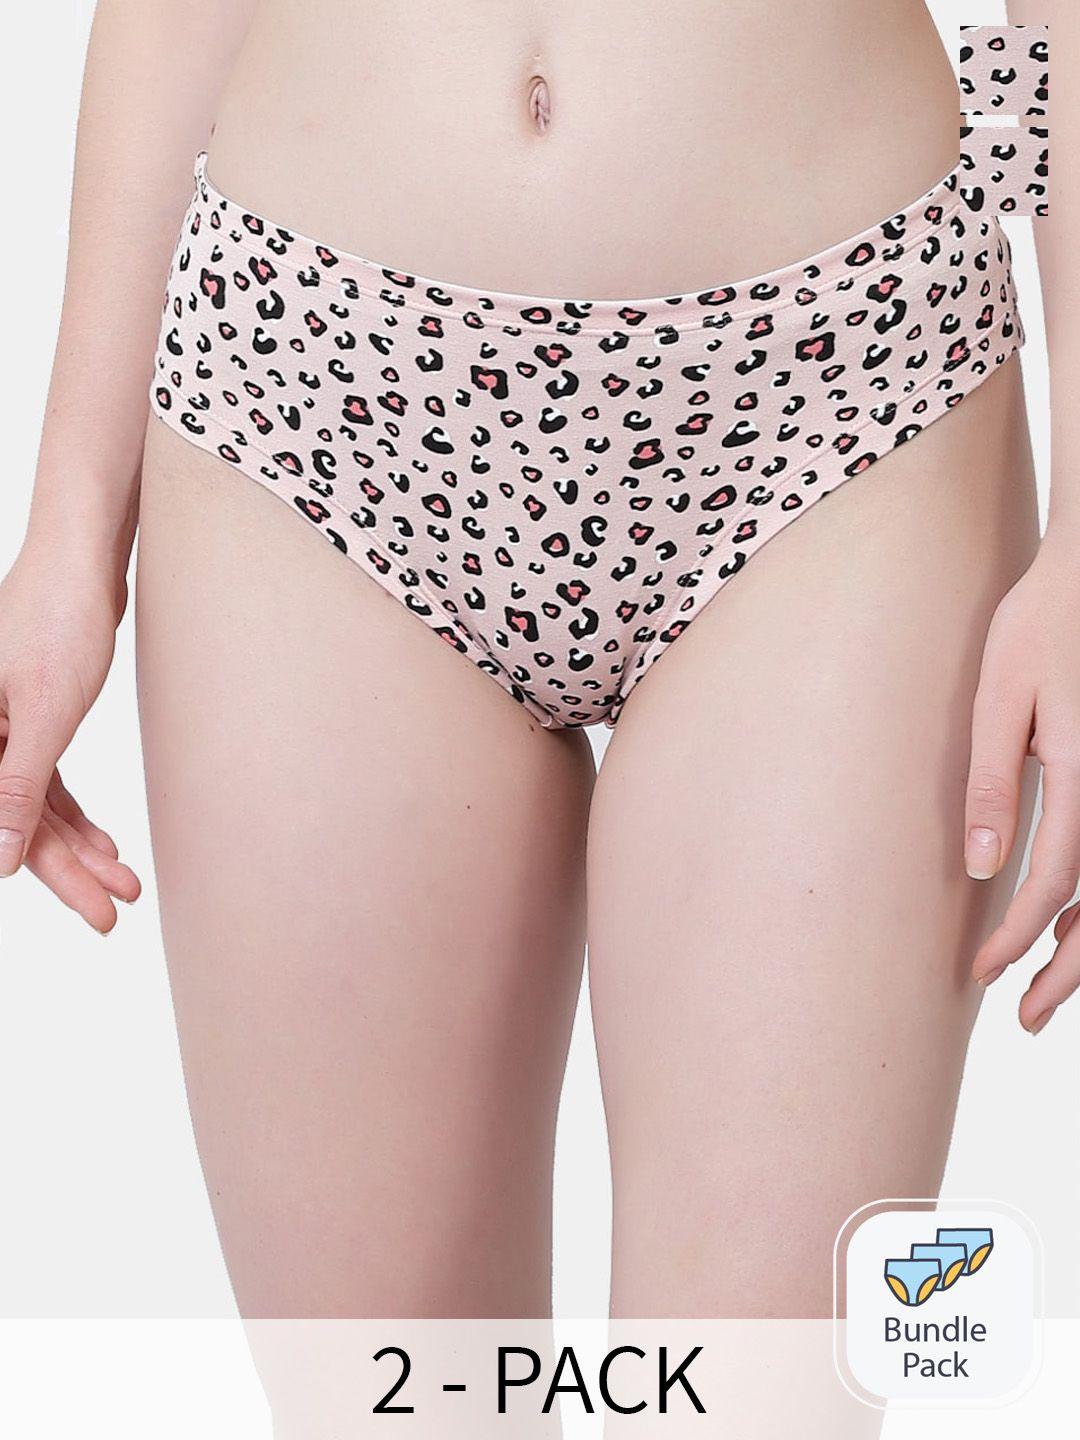 inner sense pack of 2 animal printed mid-rise basic briefs with anti microbial